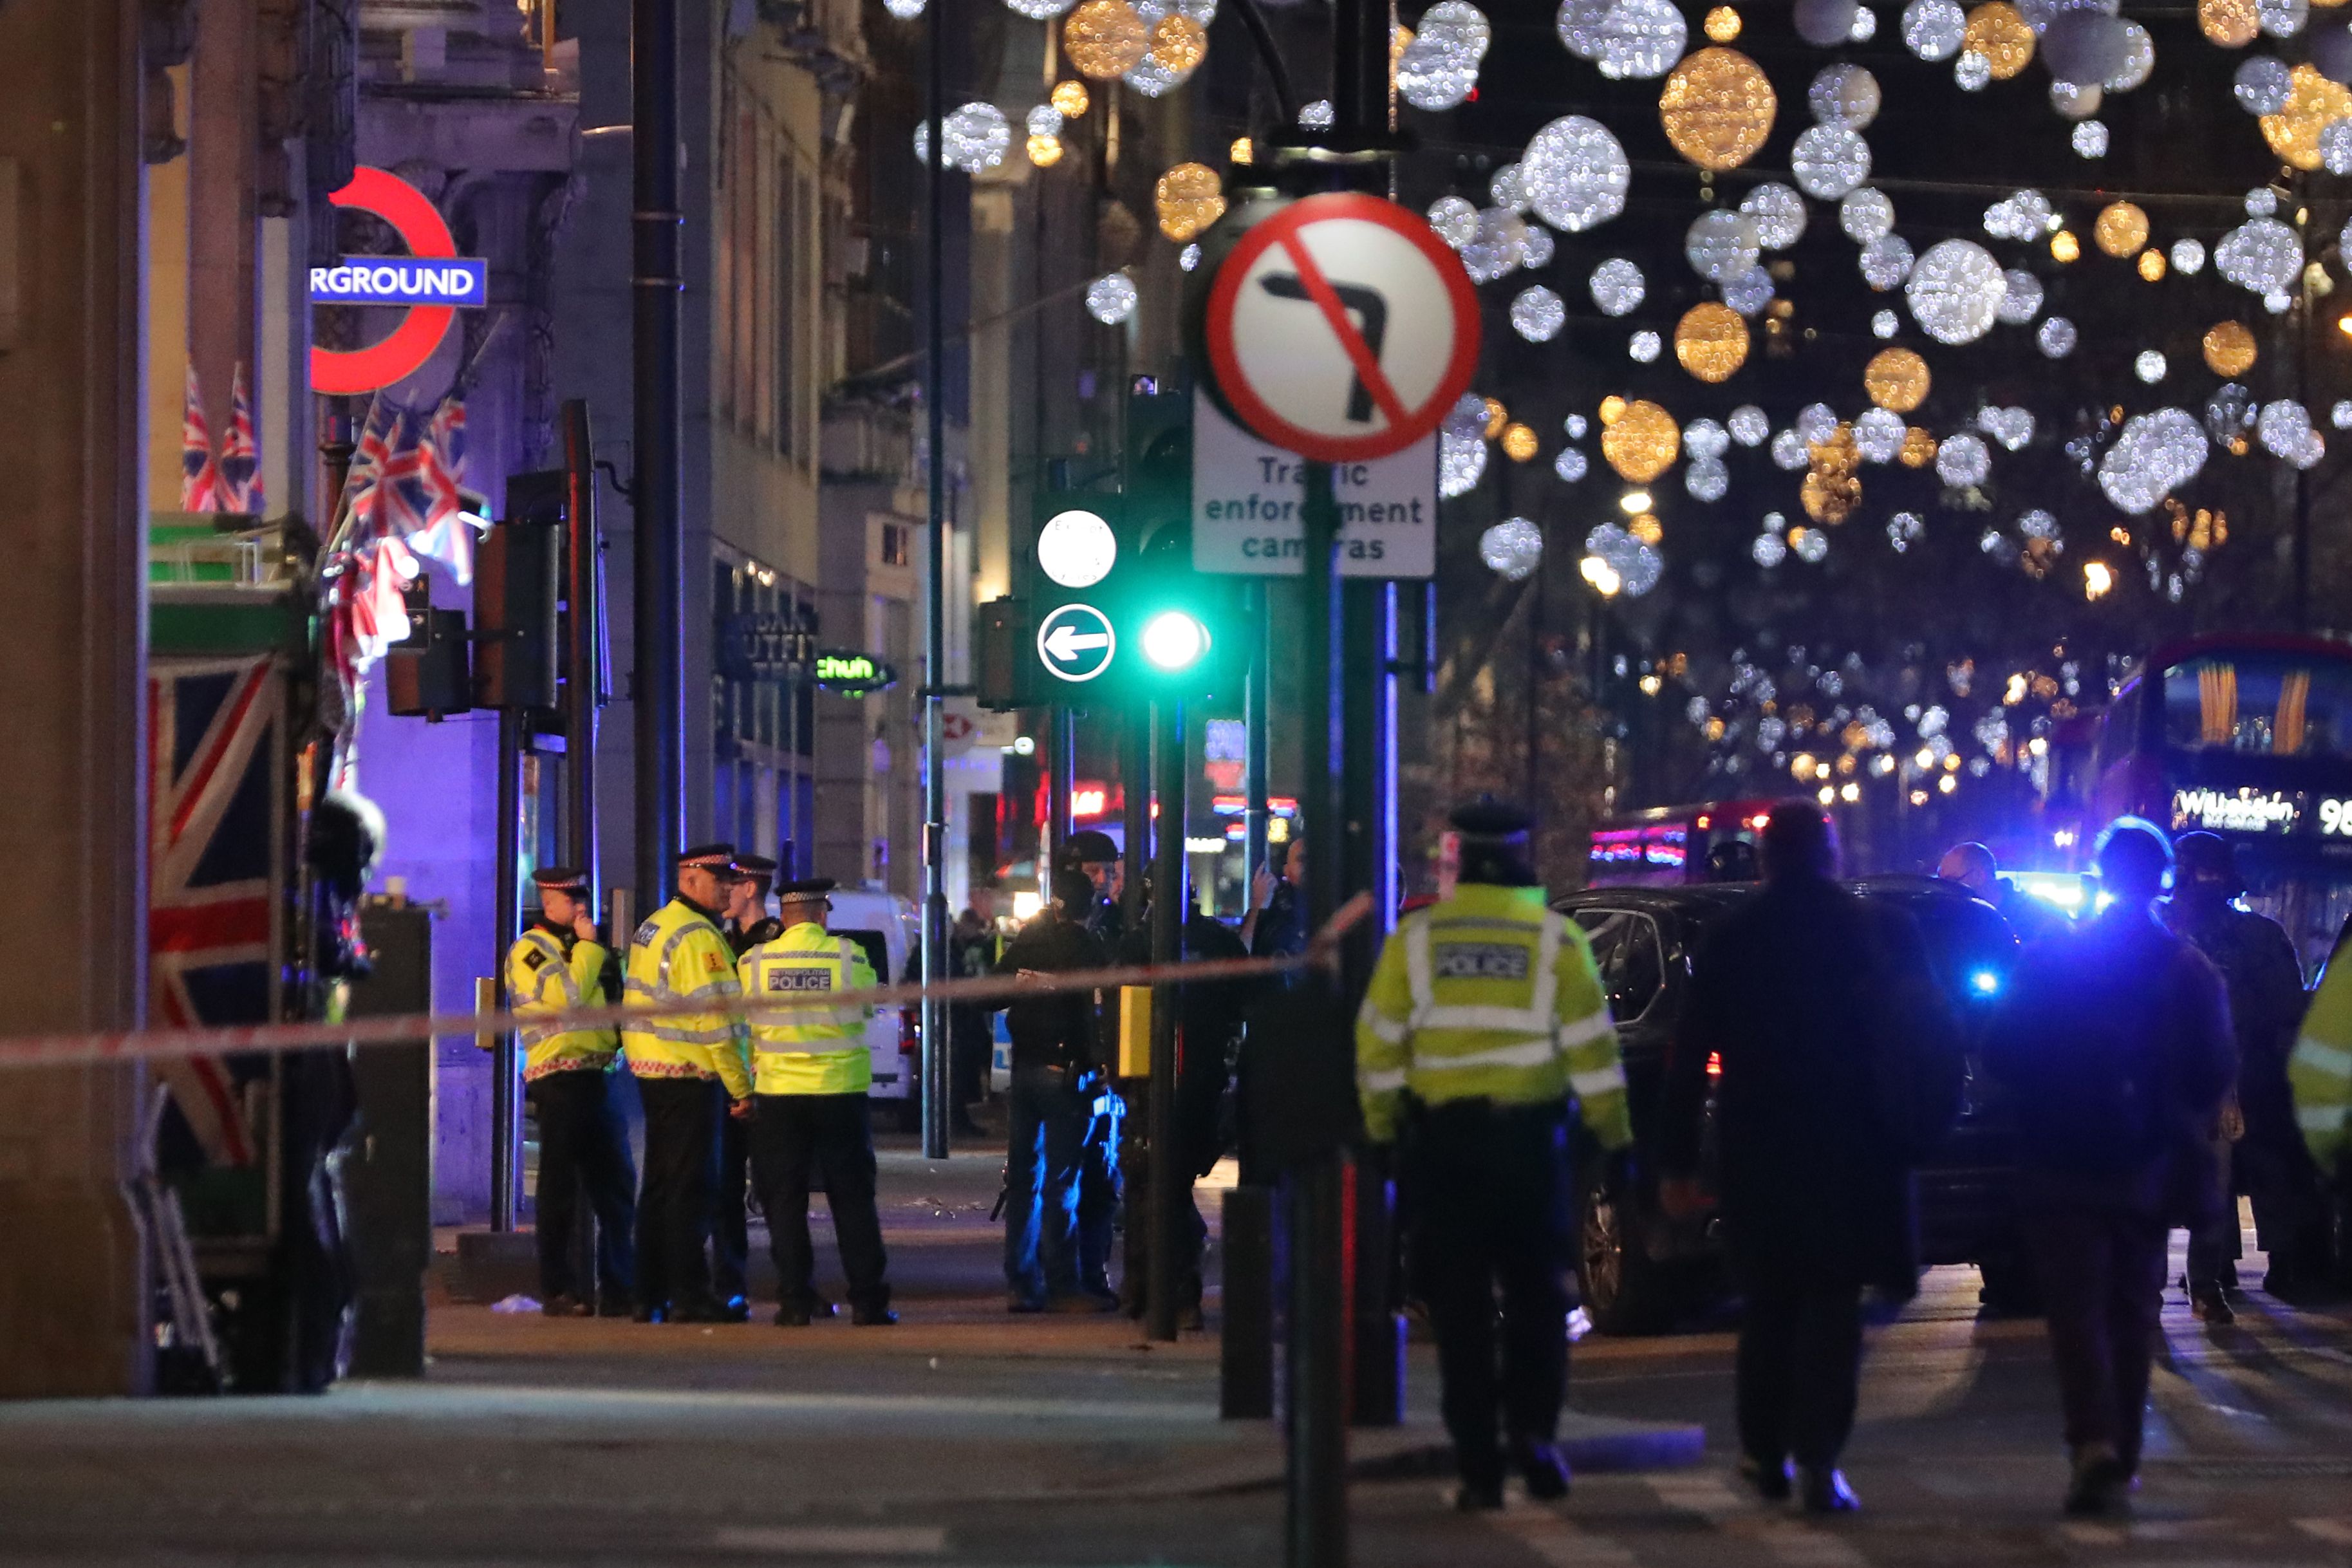 Police set up a cordon outside Oxford Circus underground station as they respond to an incident in central London on November 24, 2017. (DANIEL LEAL-OLIVAS—AFP/Getty Images)